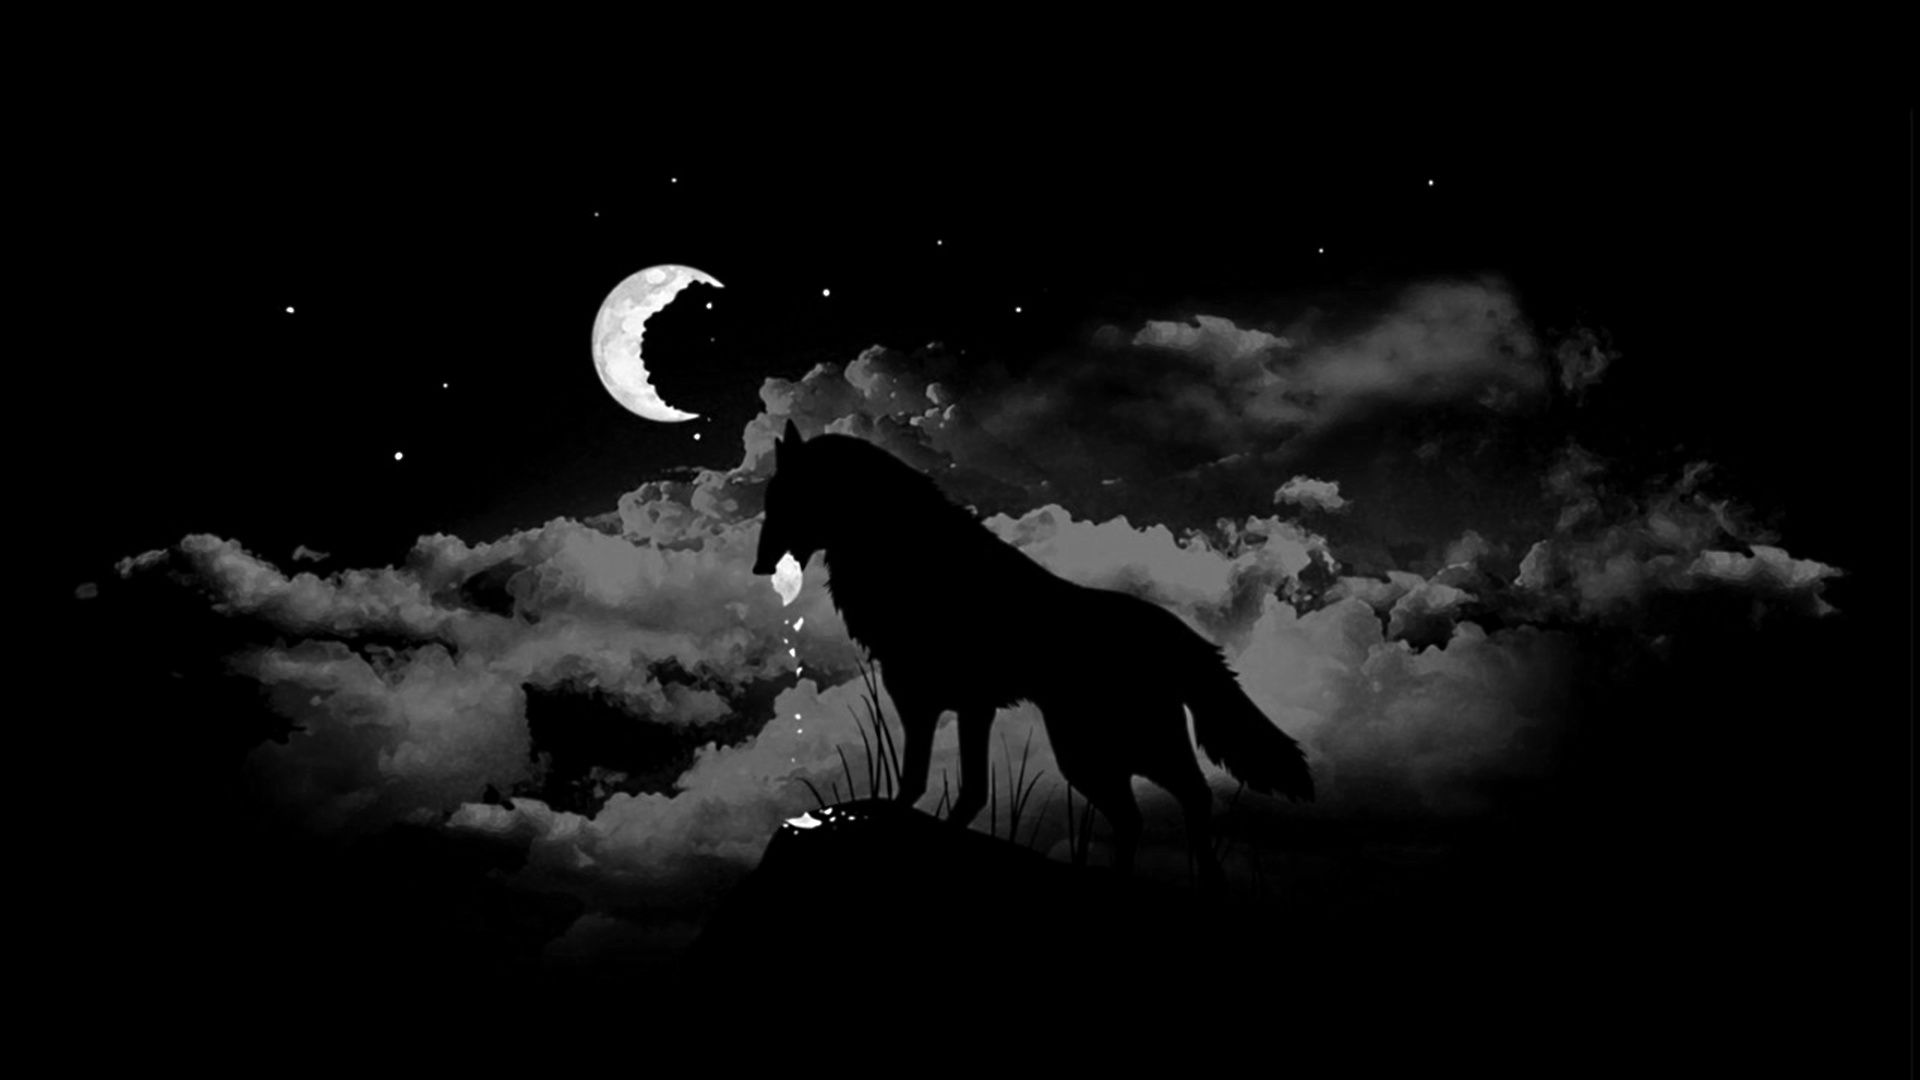 Abstract Black Wolf Wallpaper Hd wallpapers for desktop, best collection wallpapers of black wolf high resolution images for iphone 6 and iphone 7, android, ipad, smartphone, mac. abstract black wolf wallpaper